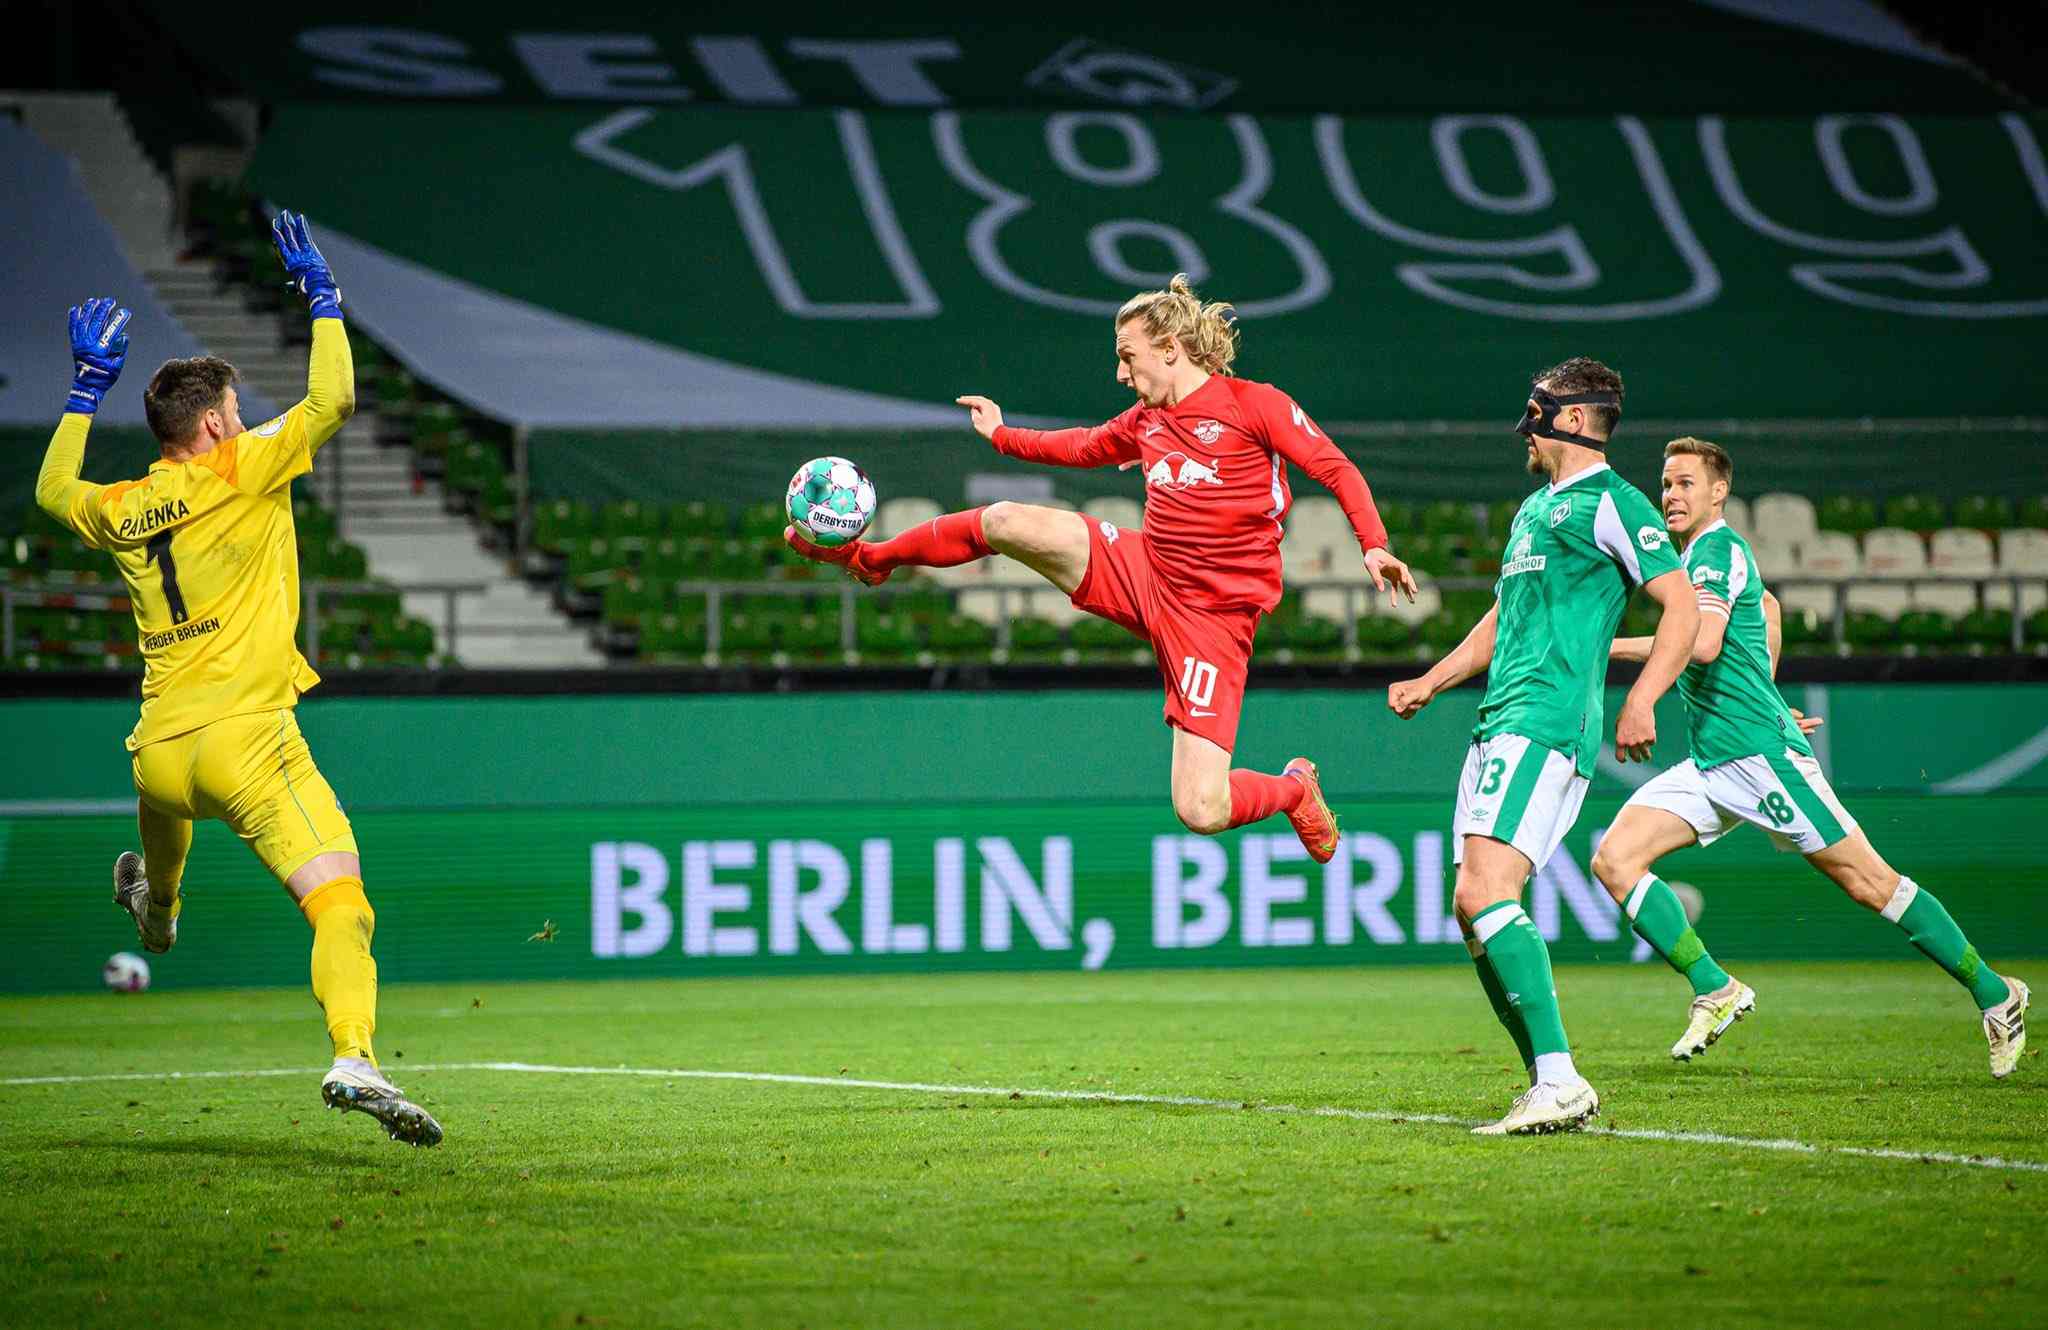 Emil Forsberg scored the last-gasp winner in the extra time against Bremen to send RB Leipzig into the German Cup final; Credit: Twitter/@RBLeipzig_EN